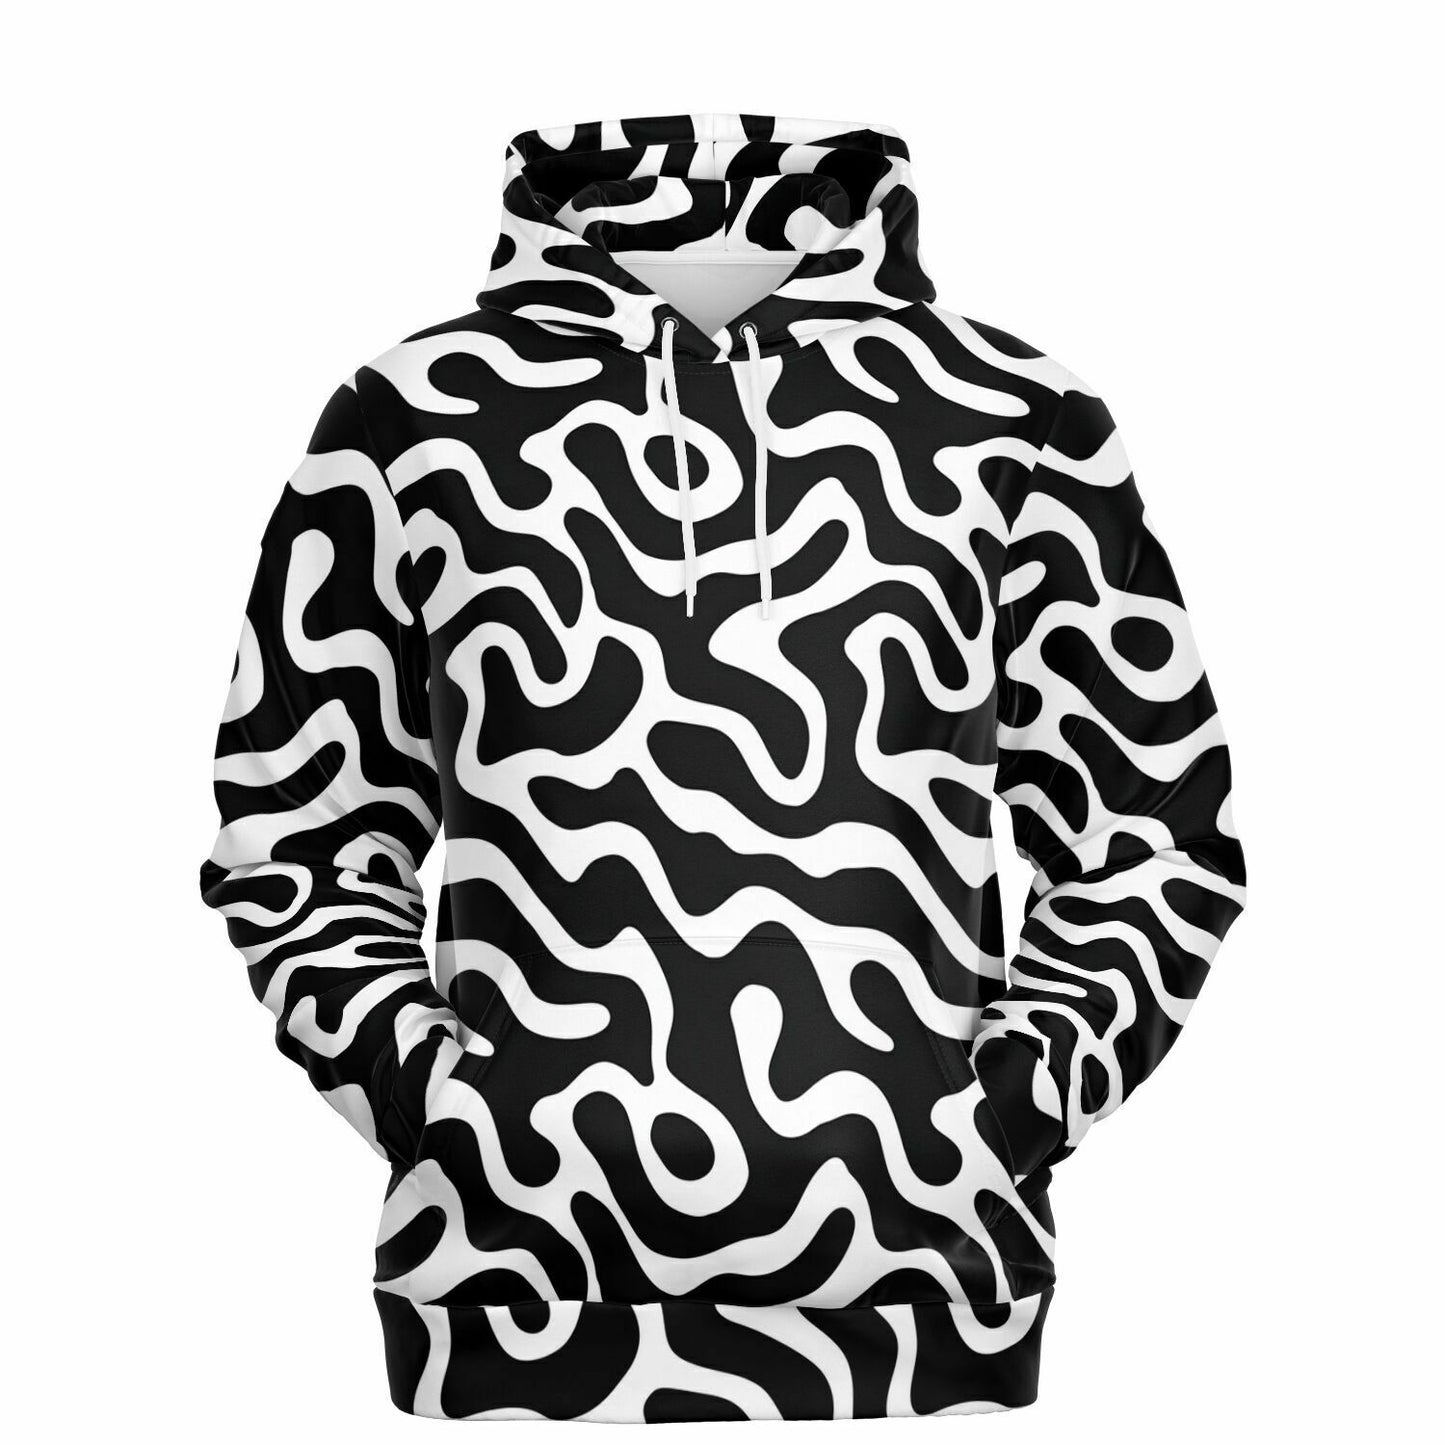 Black White Hoodie, Trippy Psychedelic Wavy Groovy Funky Pullover Men Women Adult Aesthetic Graphic Cotton Hooded Sweatshirt Pockets